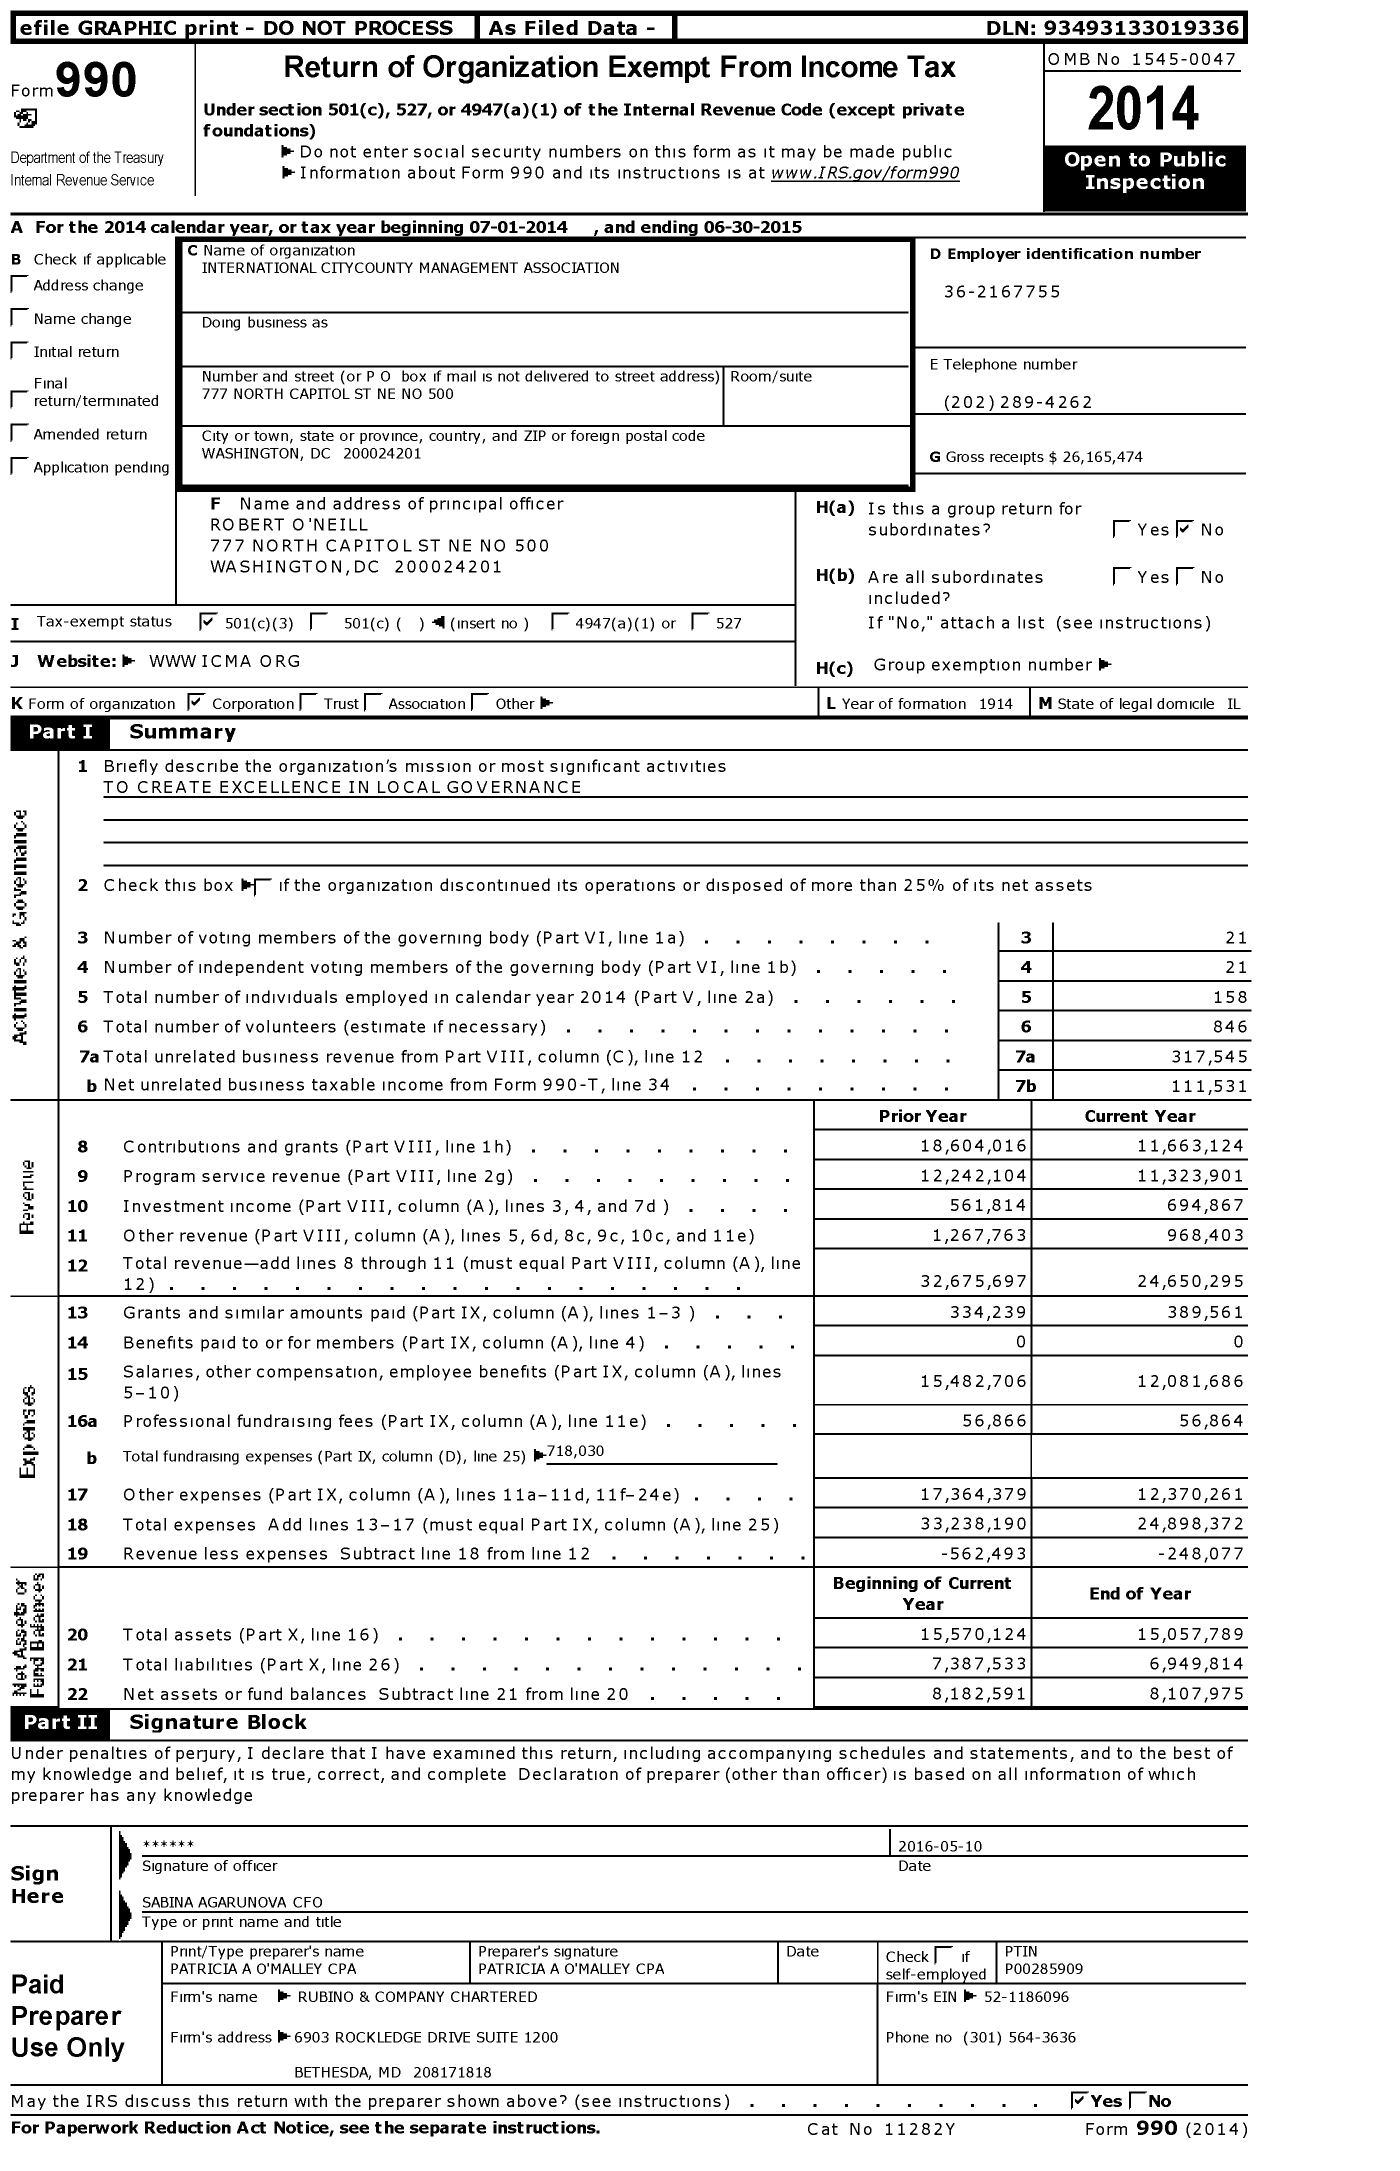 Image of first page of 2014 Form 990 for International Citycounty Management Association